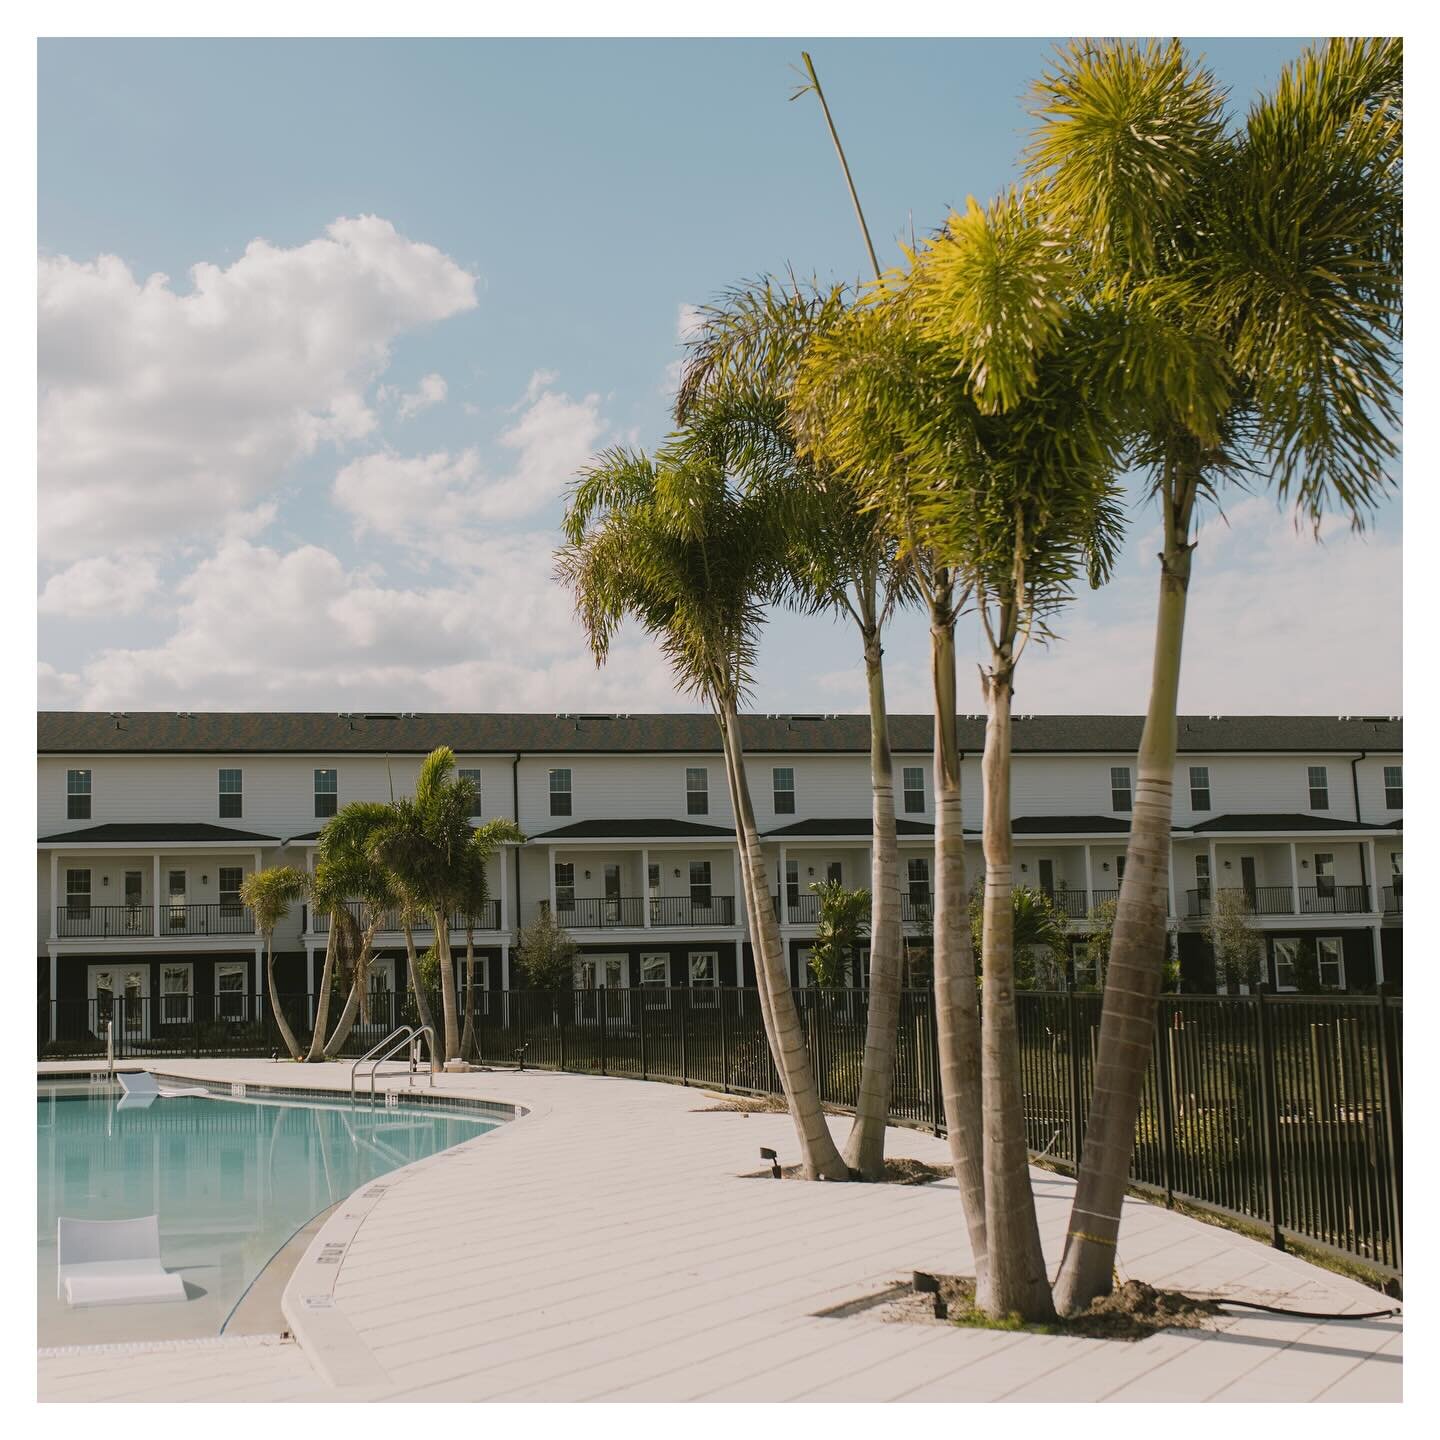 had the honor of taking progress pics of the newest, state-of-the-art apartment complex in lakeland, florida 〰️ @liveatwelcomecanary truly feels like a resort 🌴

#wilmingtonphotographer #wilmingtonbrandphotographer #wilmingtonbrandingphotographer #w